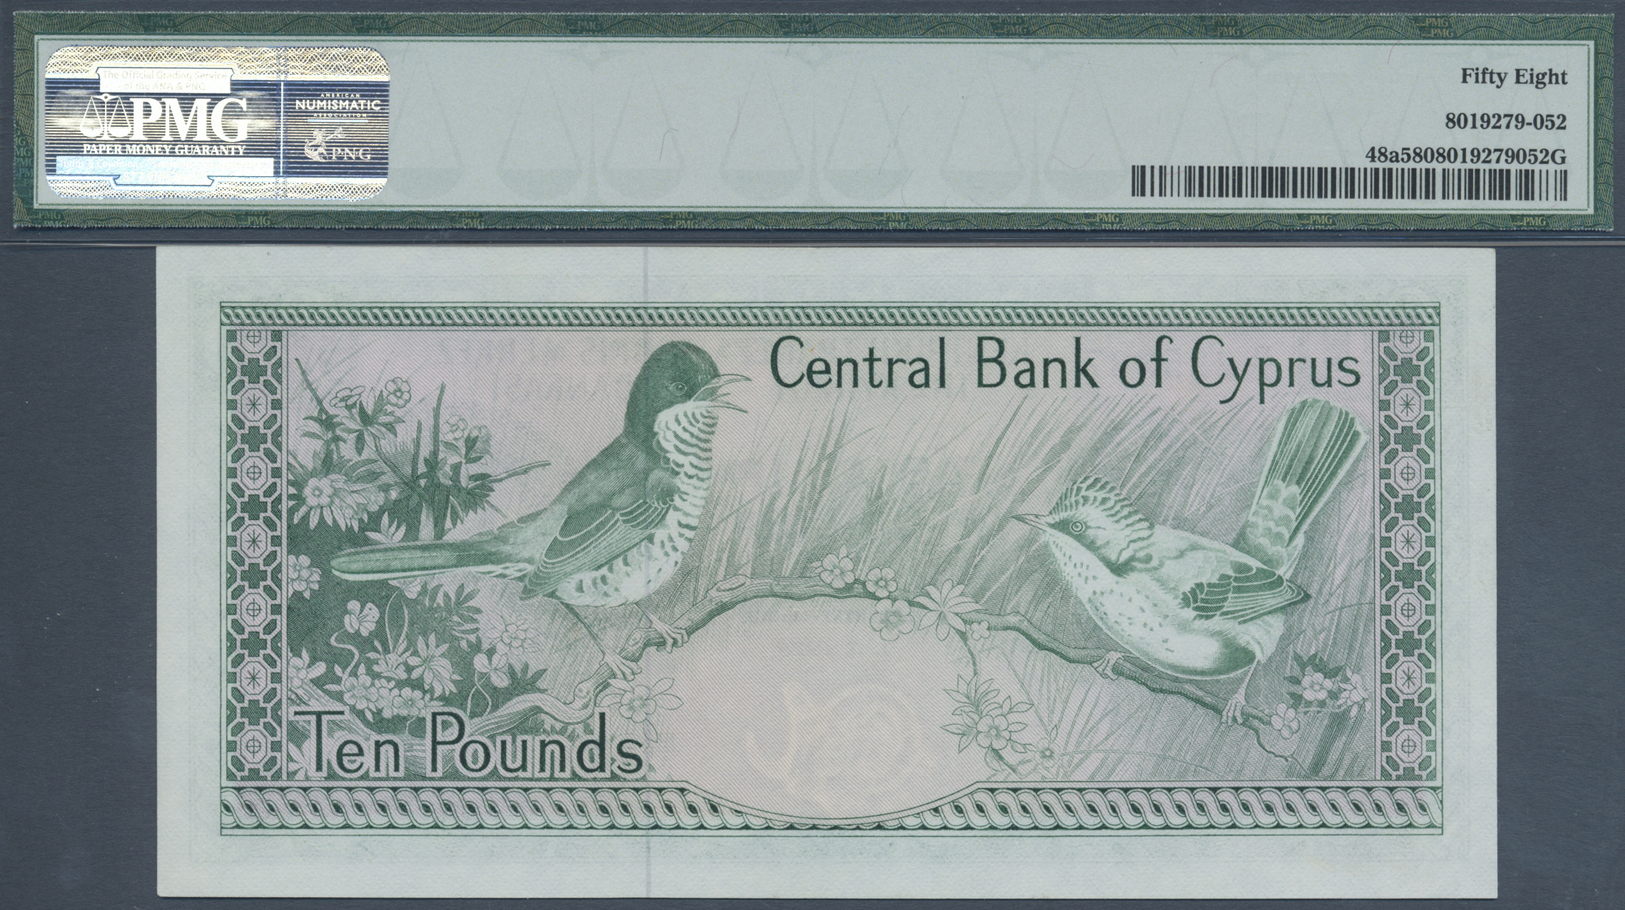 00623 Cyprus / Zypern: 10 Pounds 1978 P. 48a, PMG Graded 58 Choice About UNC. - Cyprus